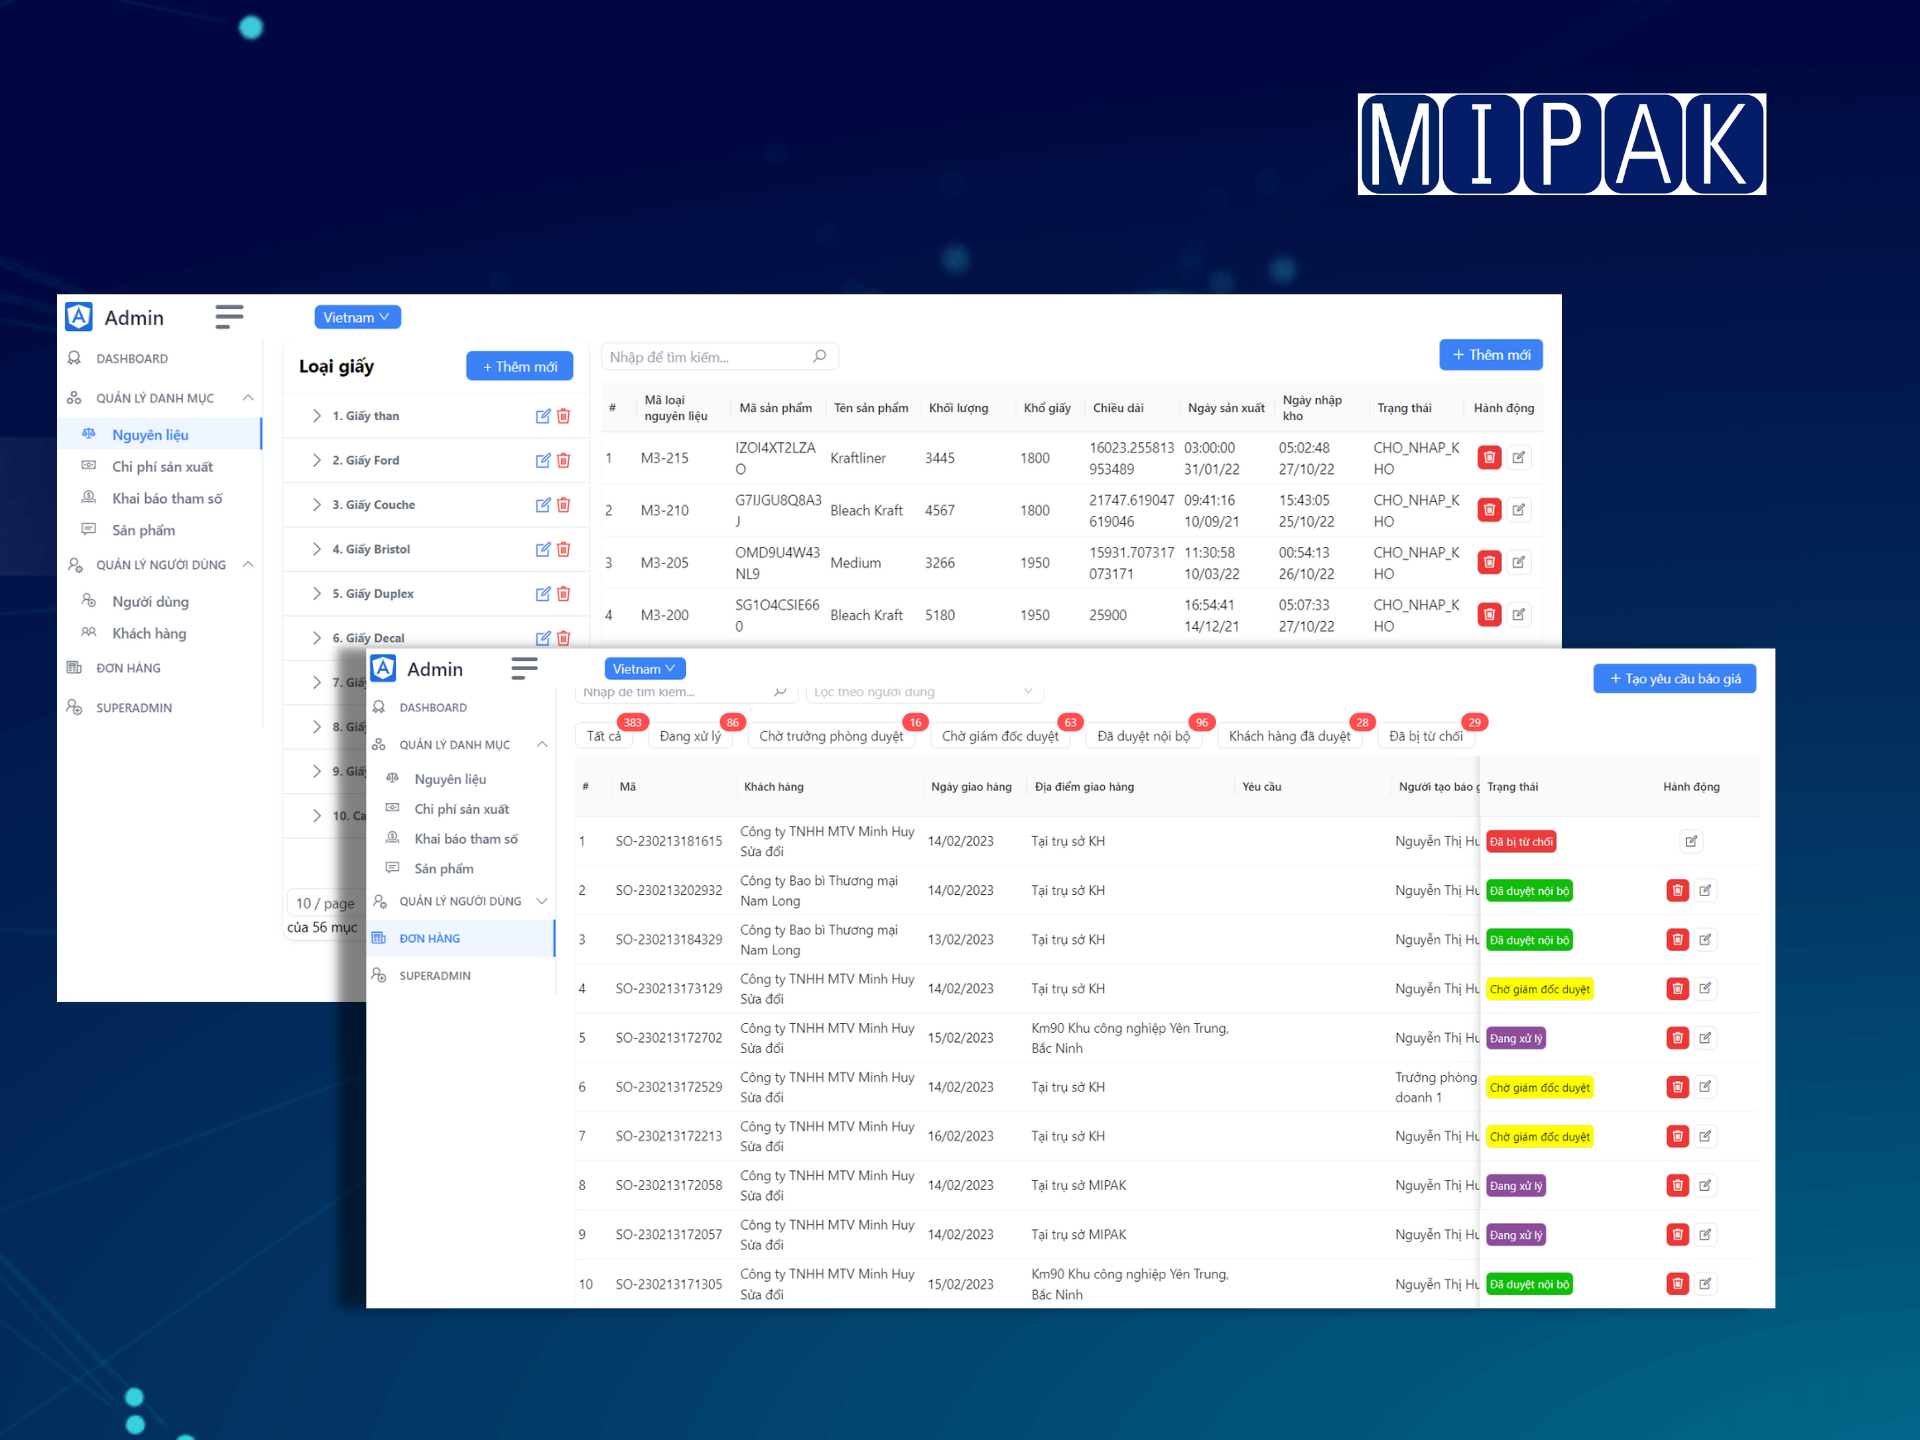 Mipak - Overview